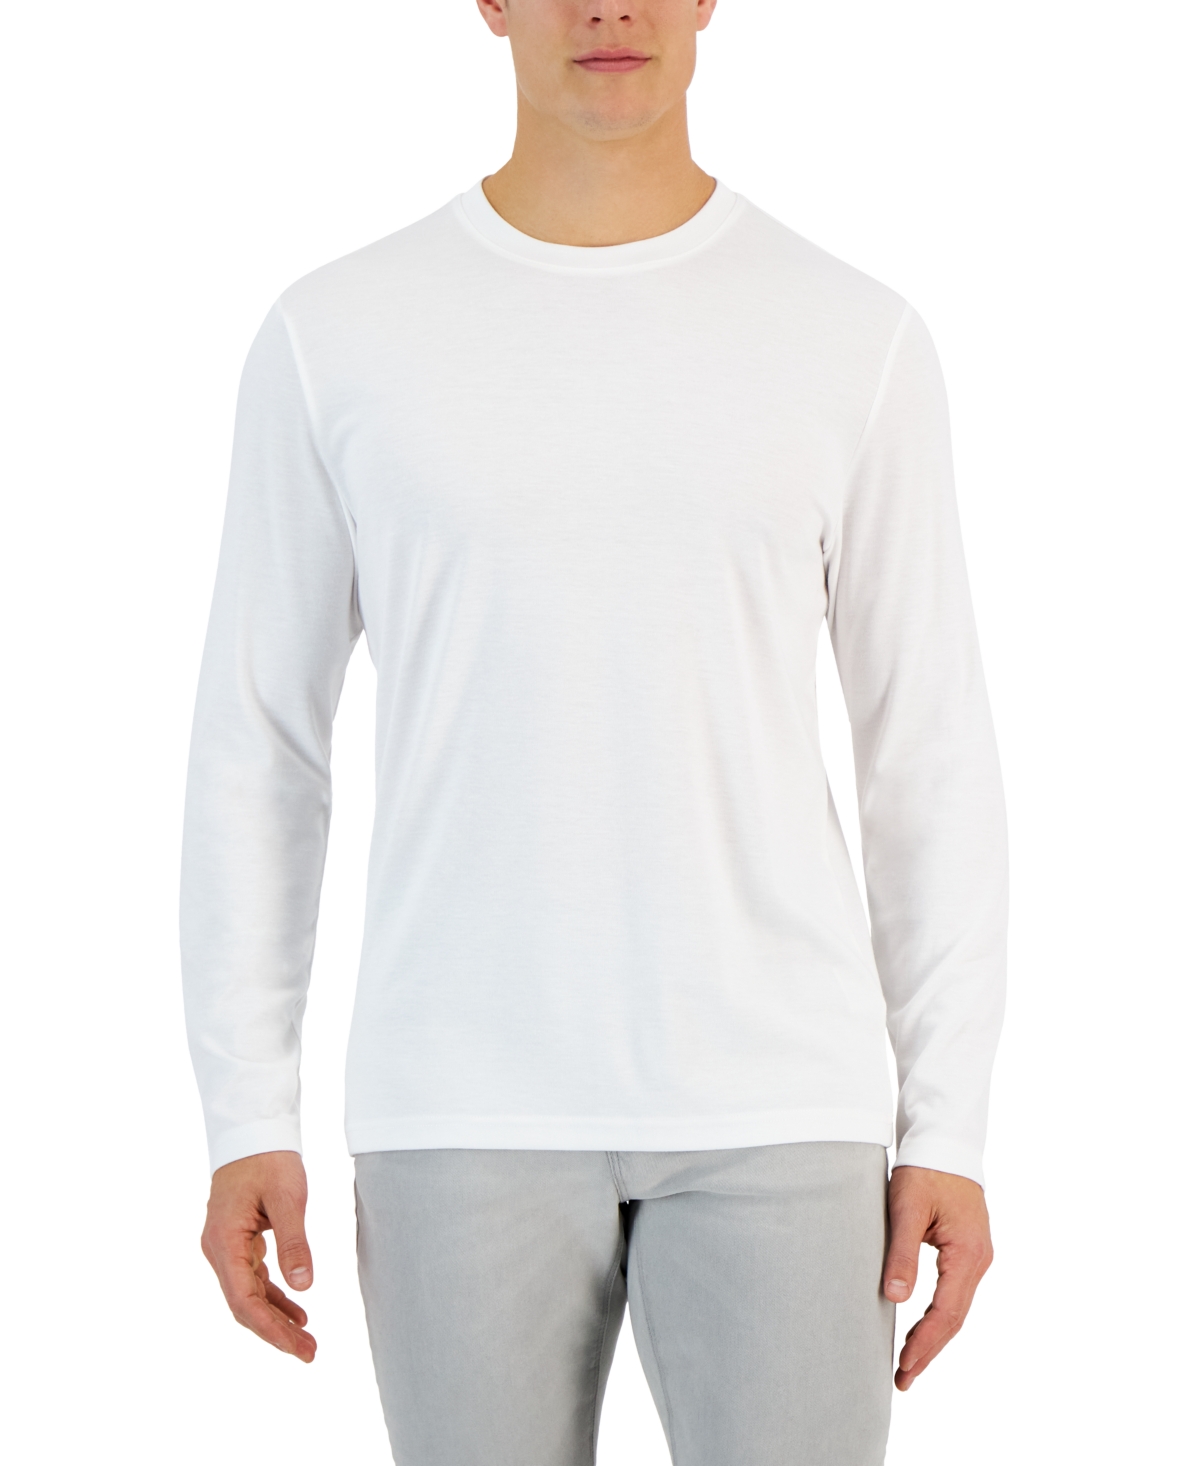 Alfani Alfatech Long Sleeve Crewneck T-shirt, Created For Macy's In Bright White